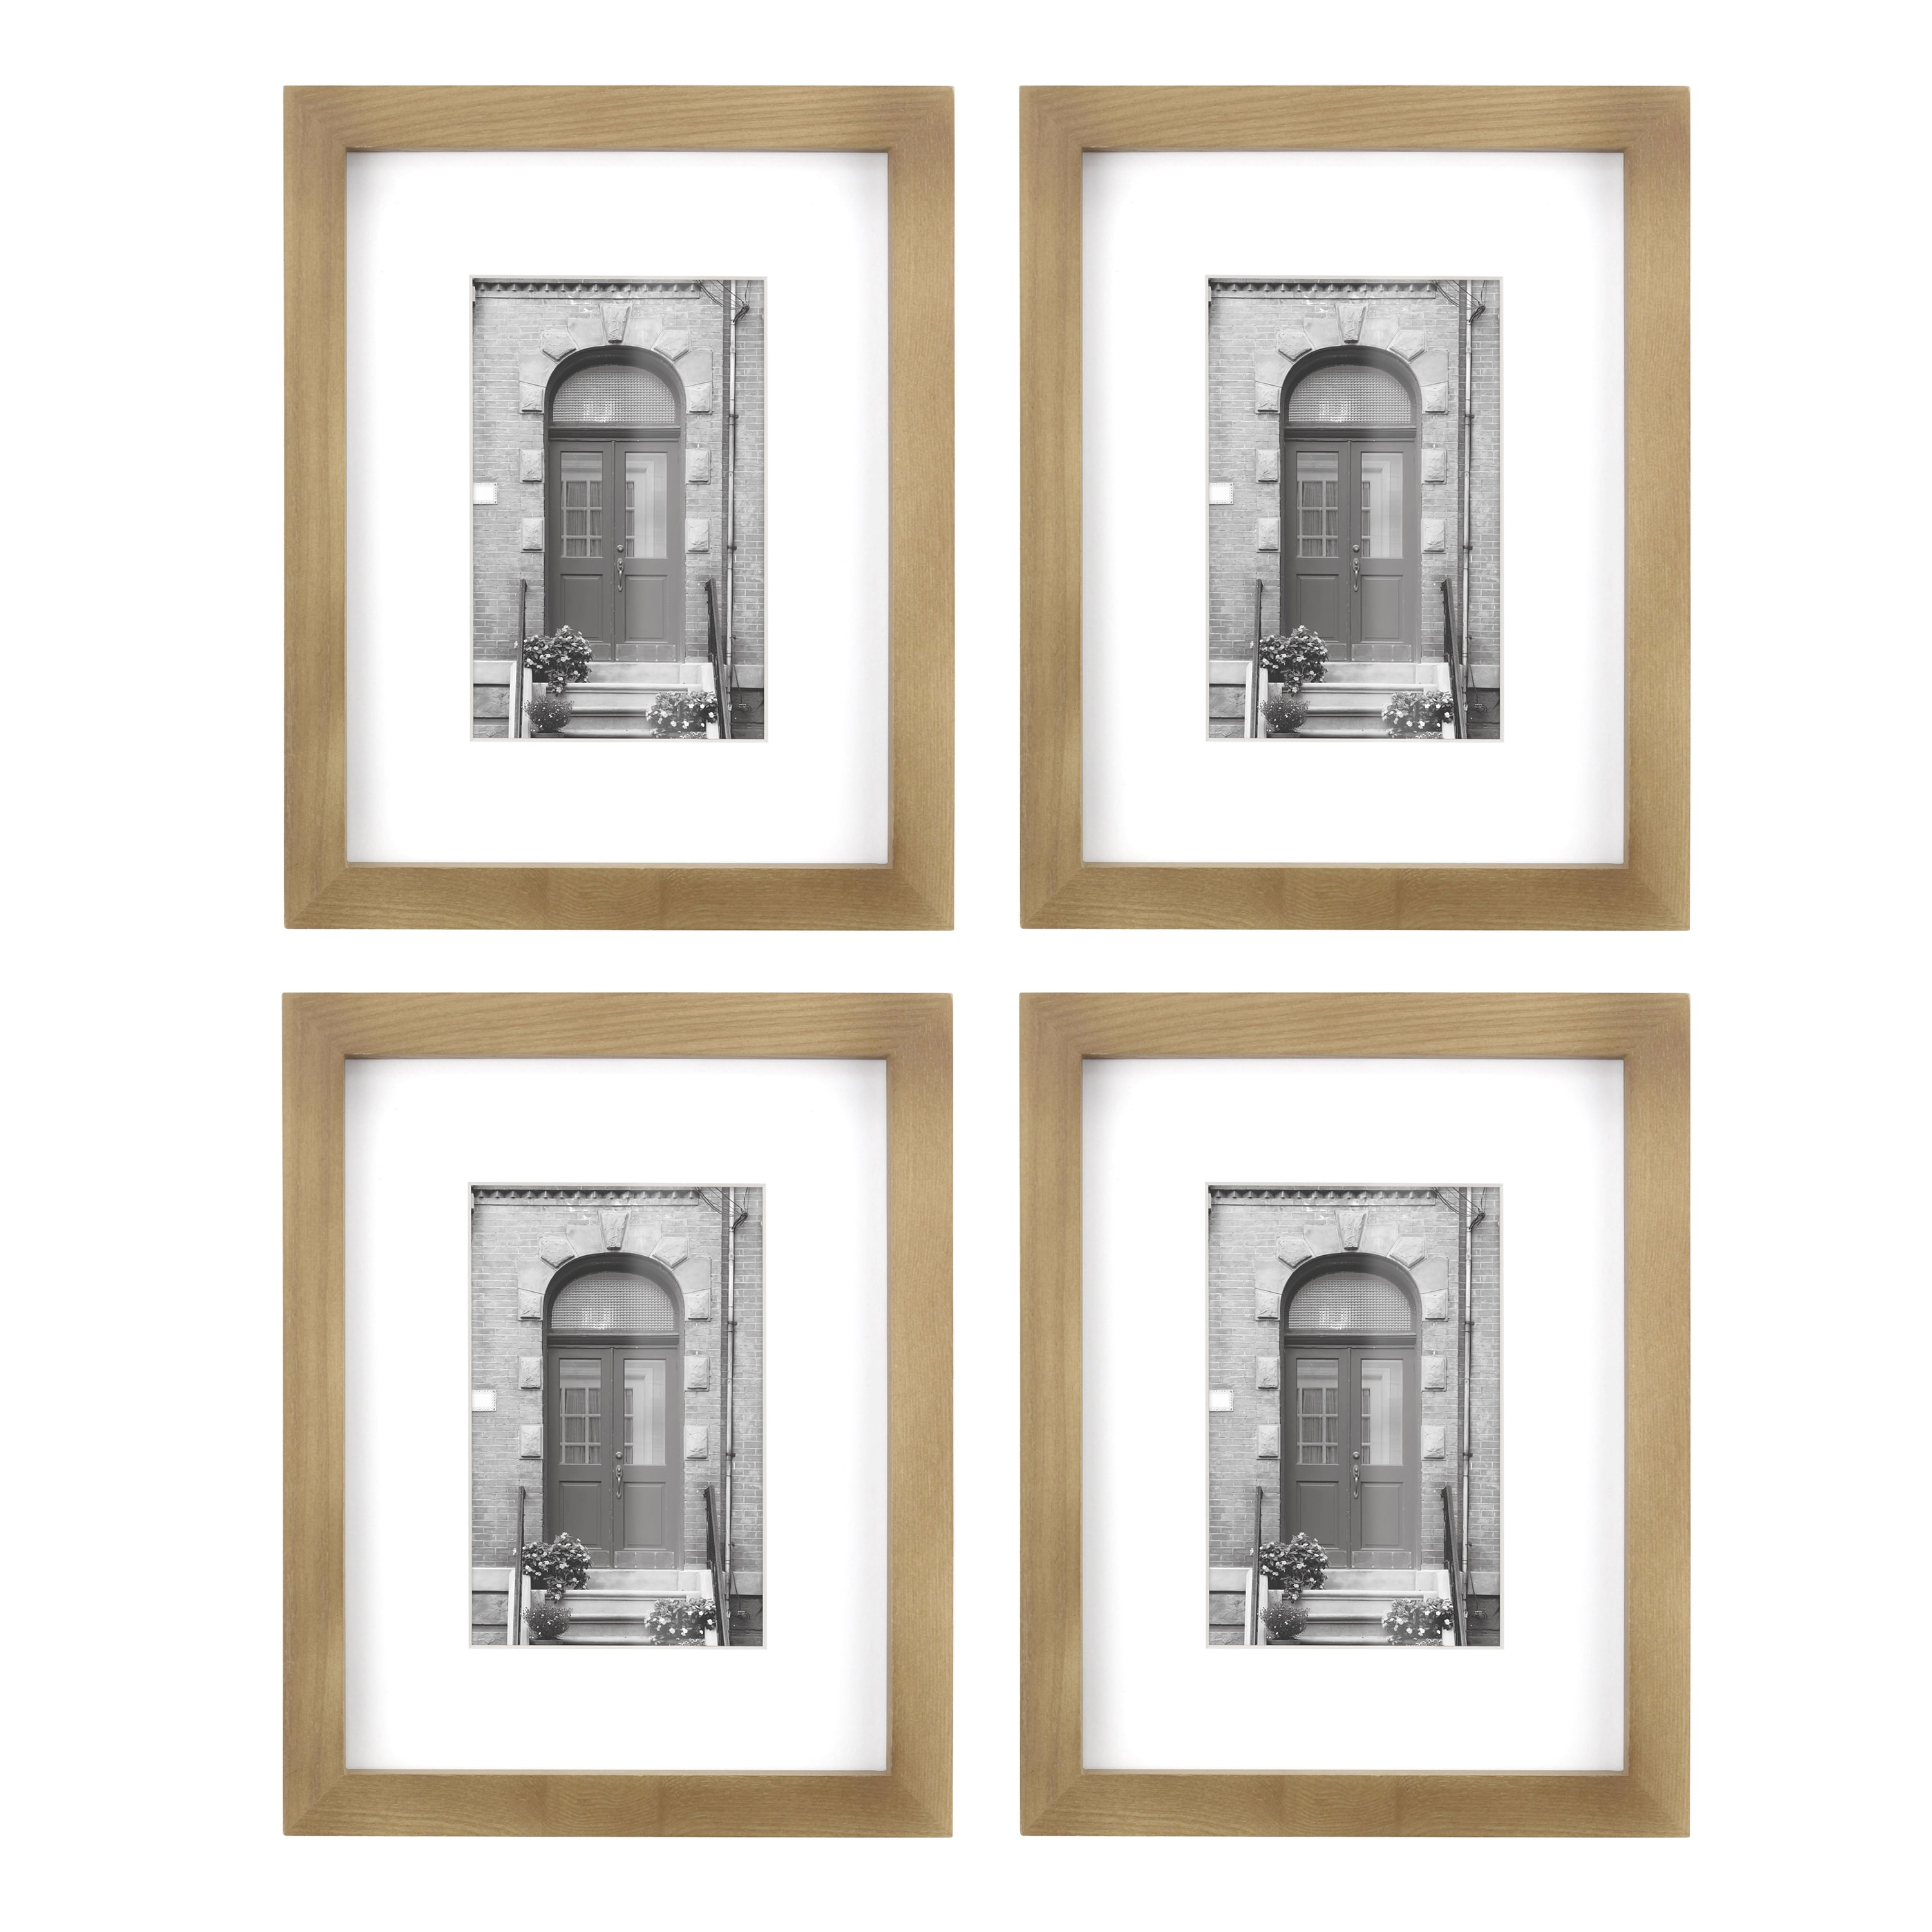 Mixed Material & Wood Gallery Wall Frame Set + Reviews